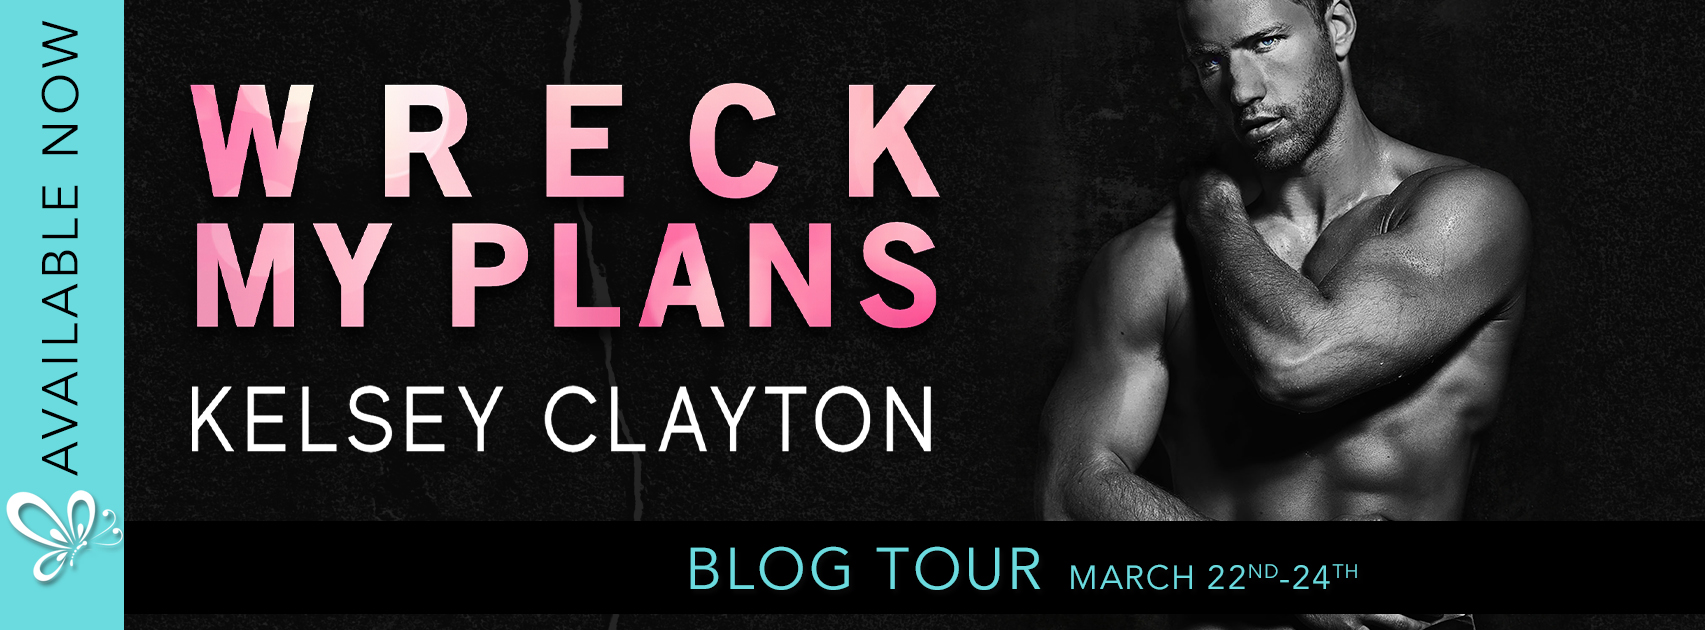 Wreck My Plans by Kelsey Clayton | Forbidden Love ARC Review